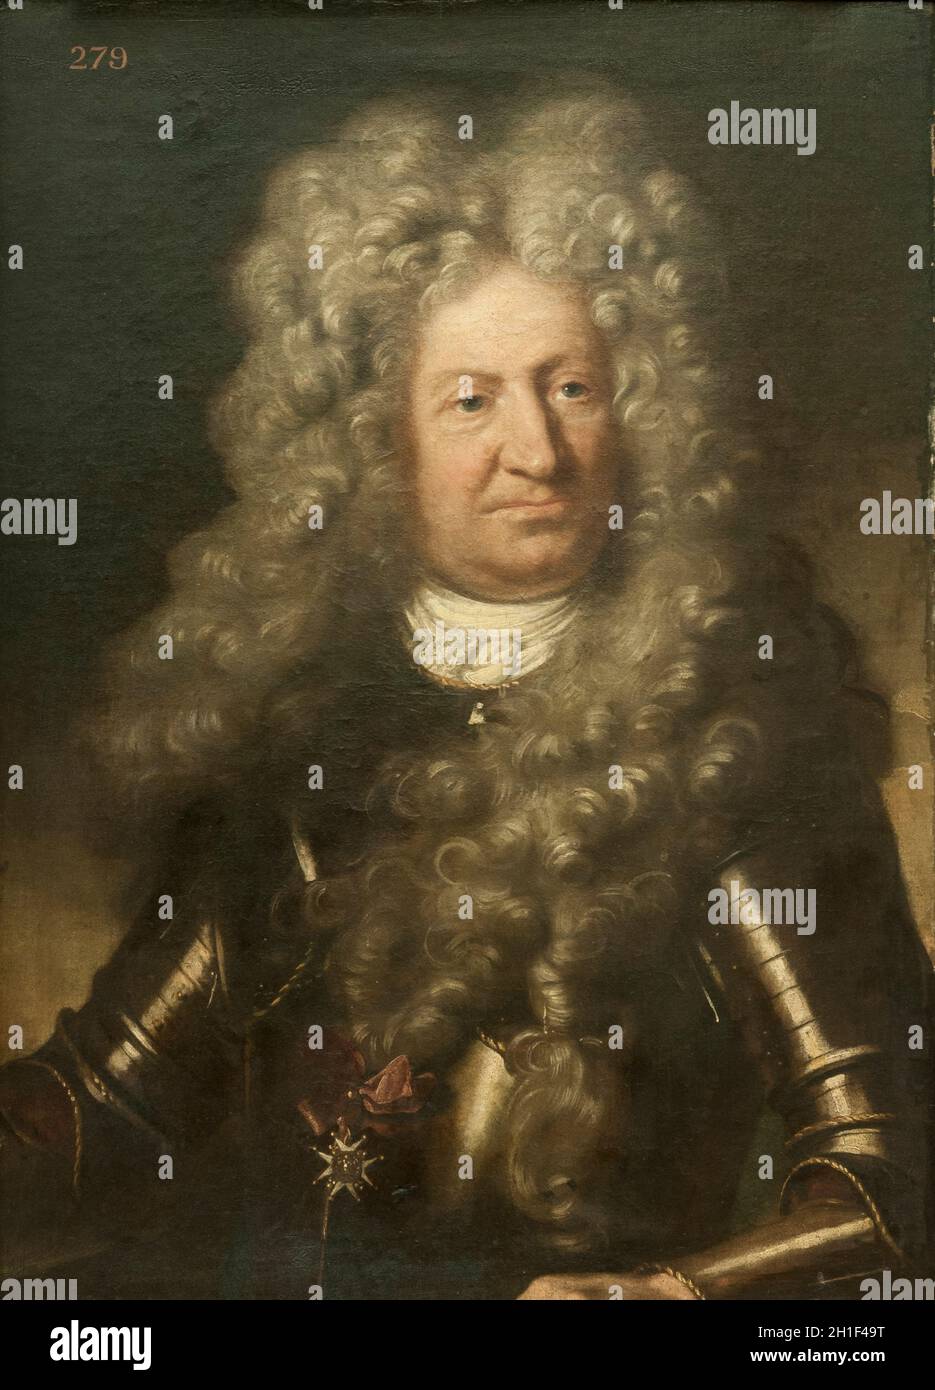 FRANCE. NORD (59). DUNKERQUE. MUSEUM OF FINE ARTS. PORTRAIT OF JEAN BART. OIL ON CANVAS. (18 TH CENTURY) APPROXIMATE DATE ANONYMOUS FRENCH SCHOOL Stock Photo